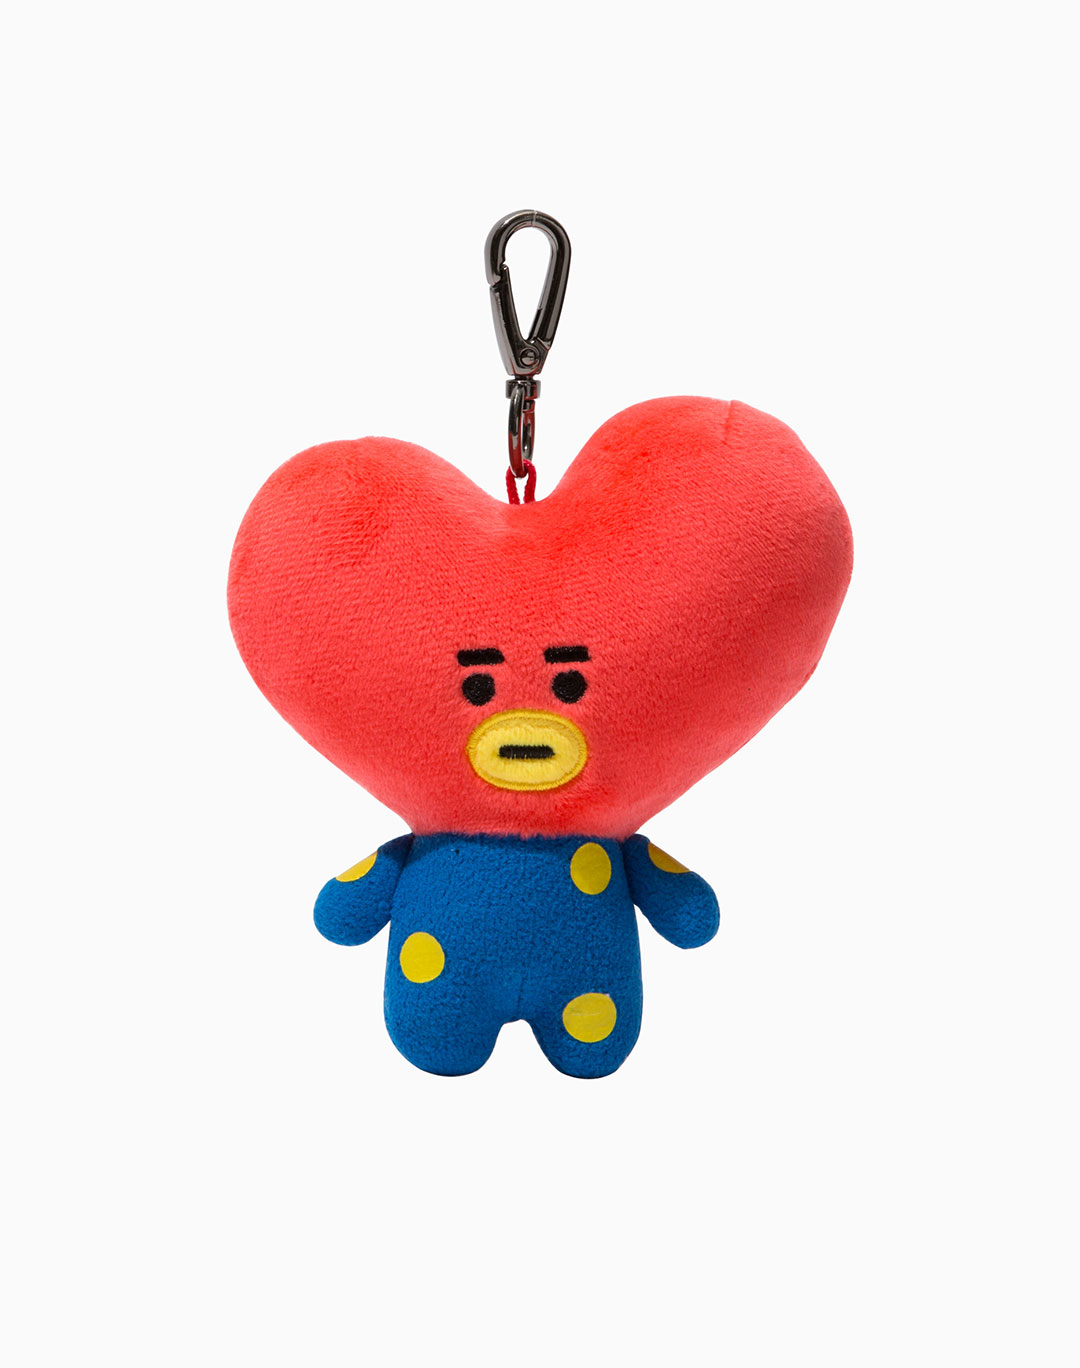 BT21 Plushies: The Cutest Plushies Ever! - YumeTwins: The Monthly Kawaii  Subscription Box Straight from Tokyo to Your Door!